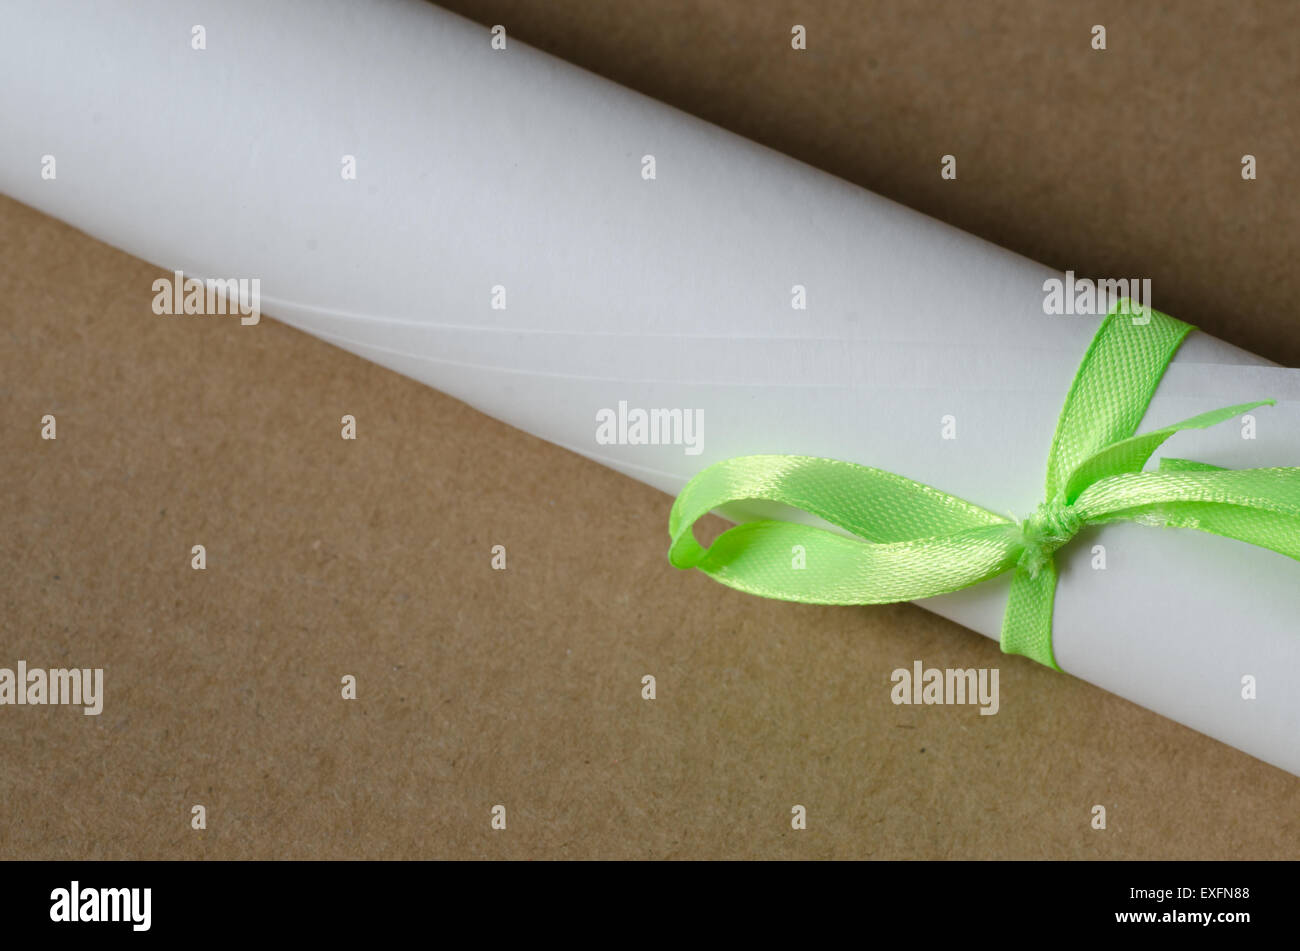 paper roll with green ribbon Stock Photo